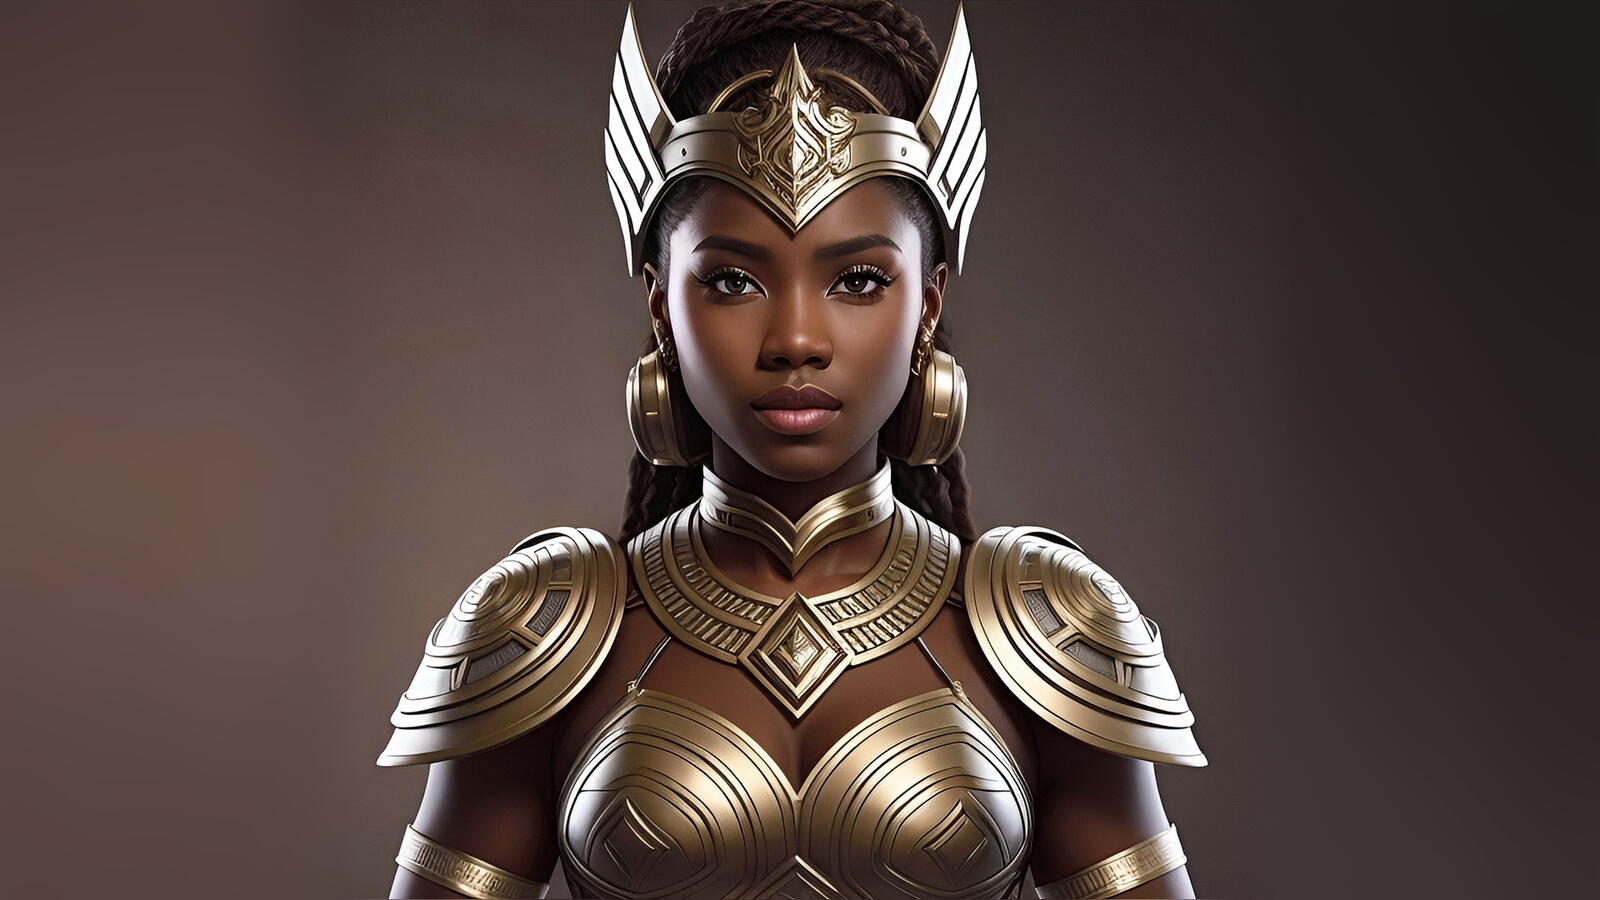 Free photo Portrait of a black girl in gold armor